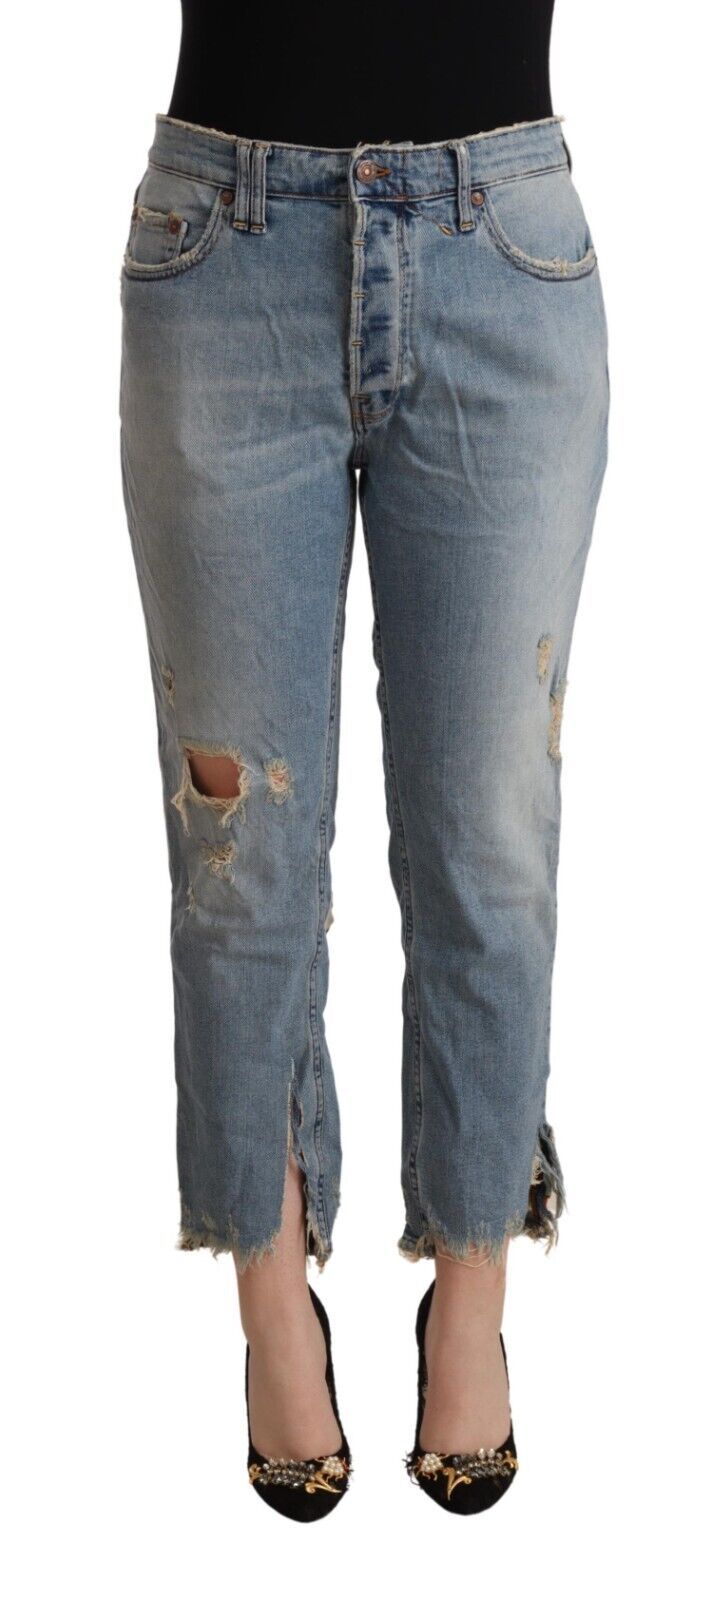 CYCLE Chic Distressed Mid Waist Cropped Women's Denim